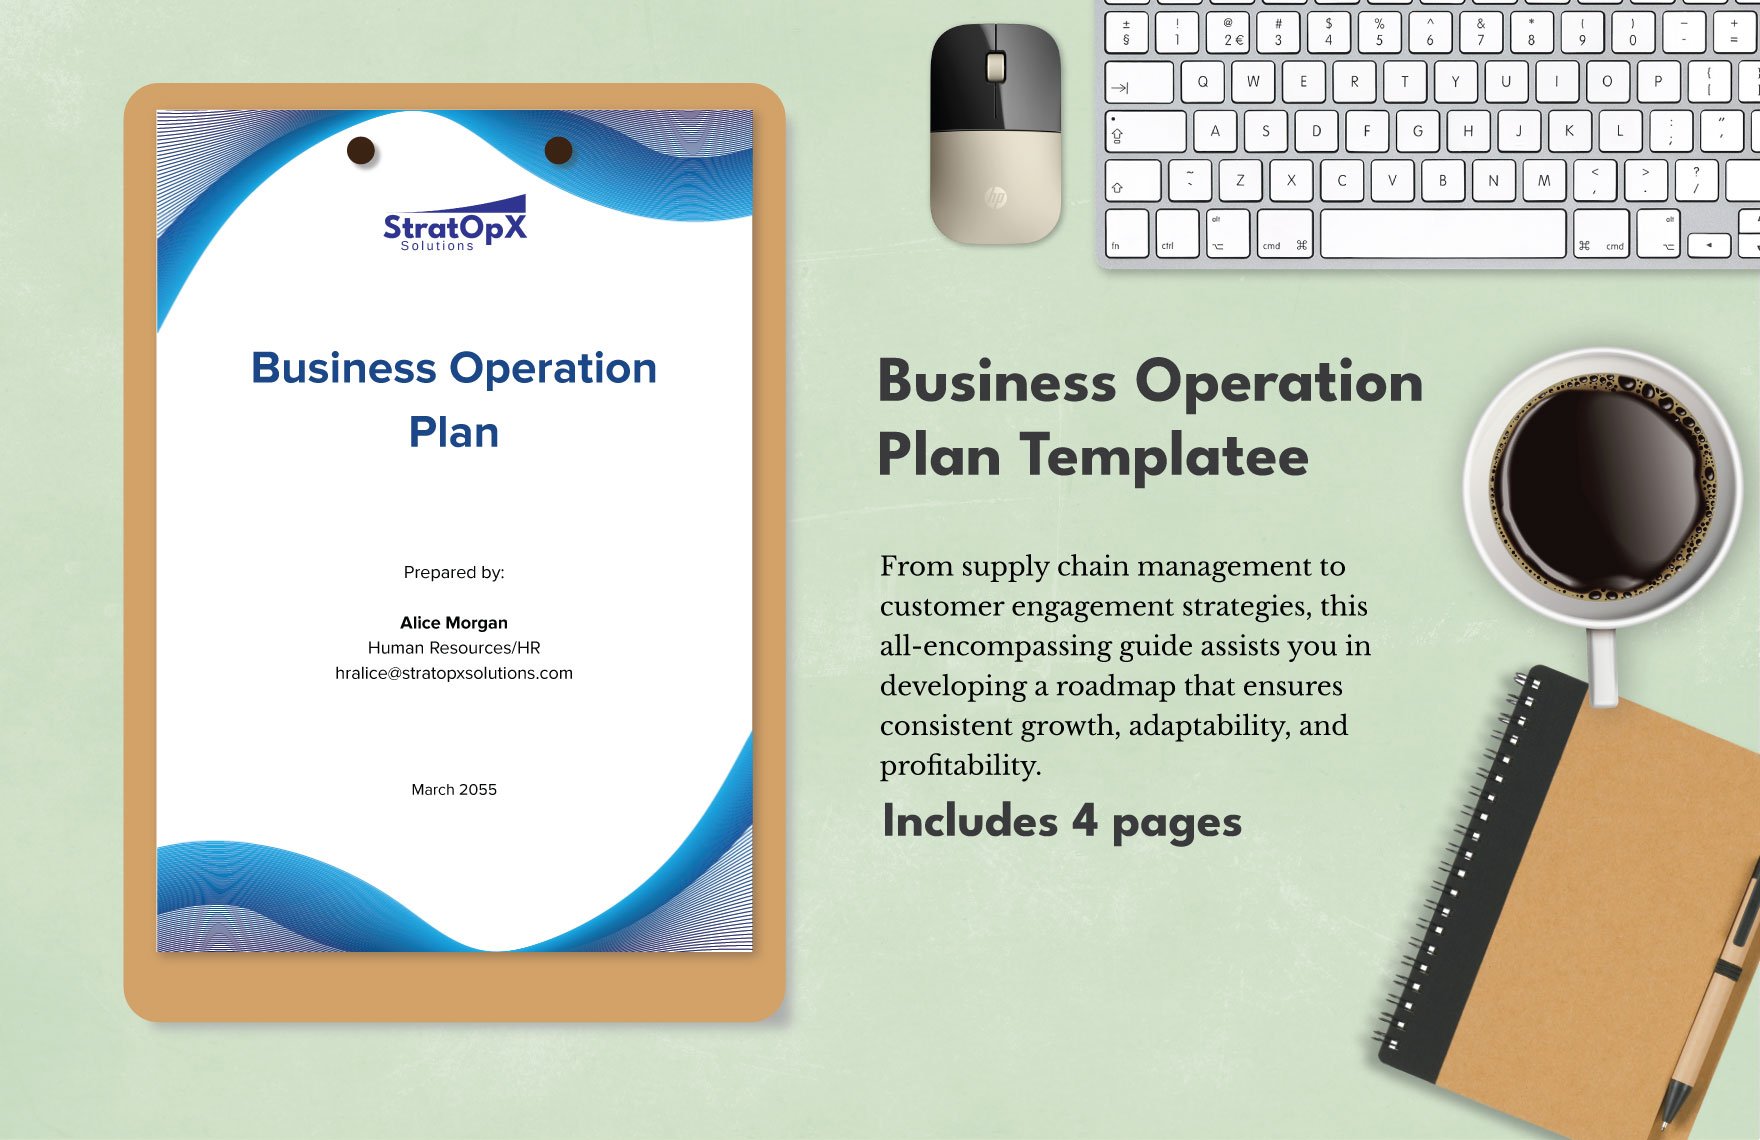 Business Operation Plan Template in Word, Google Docs, PDF